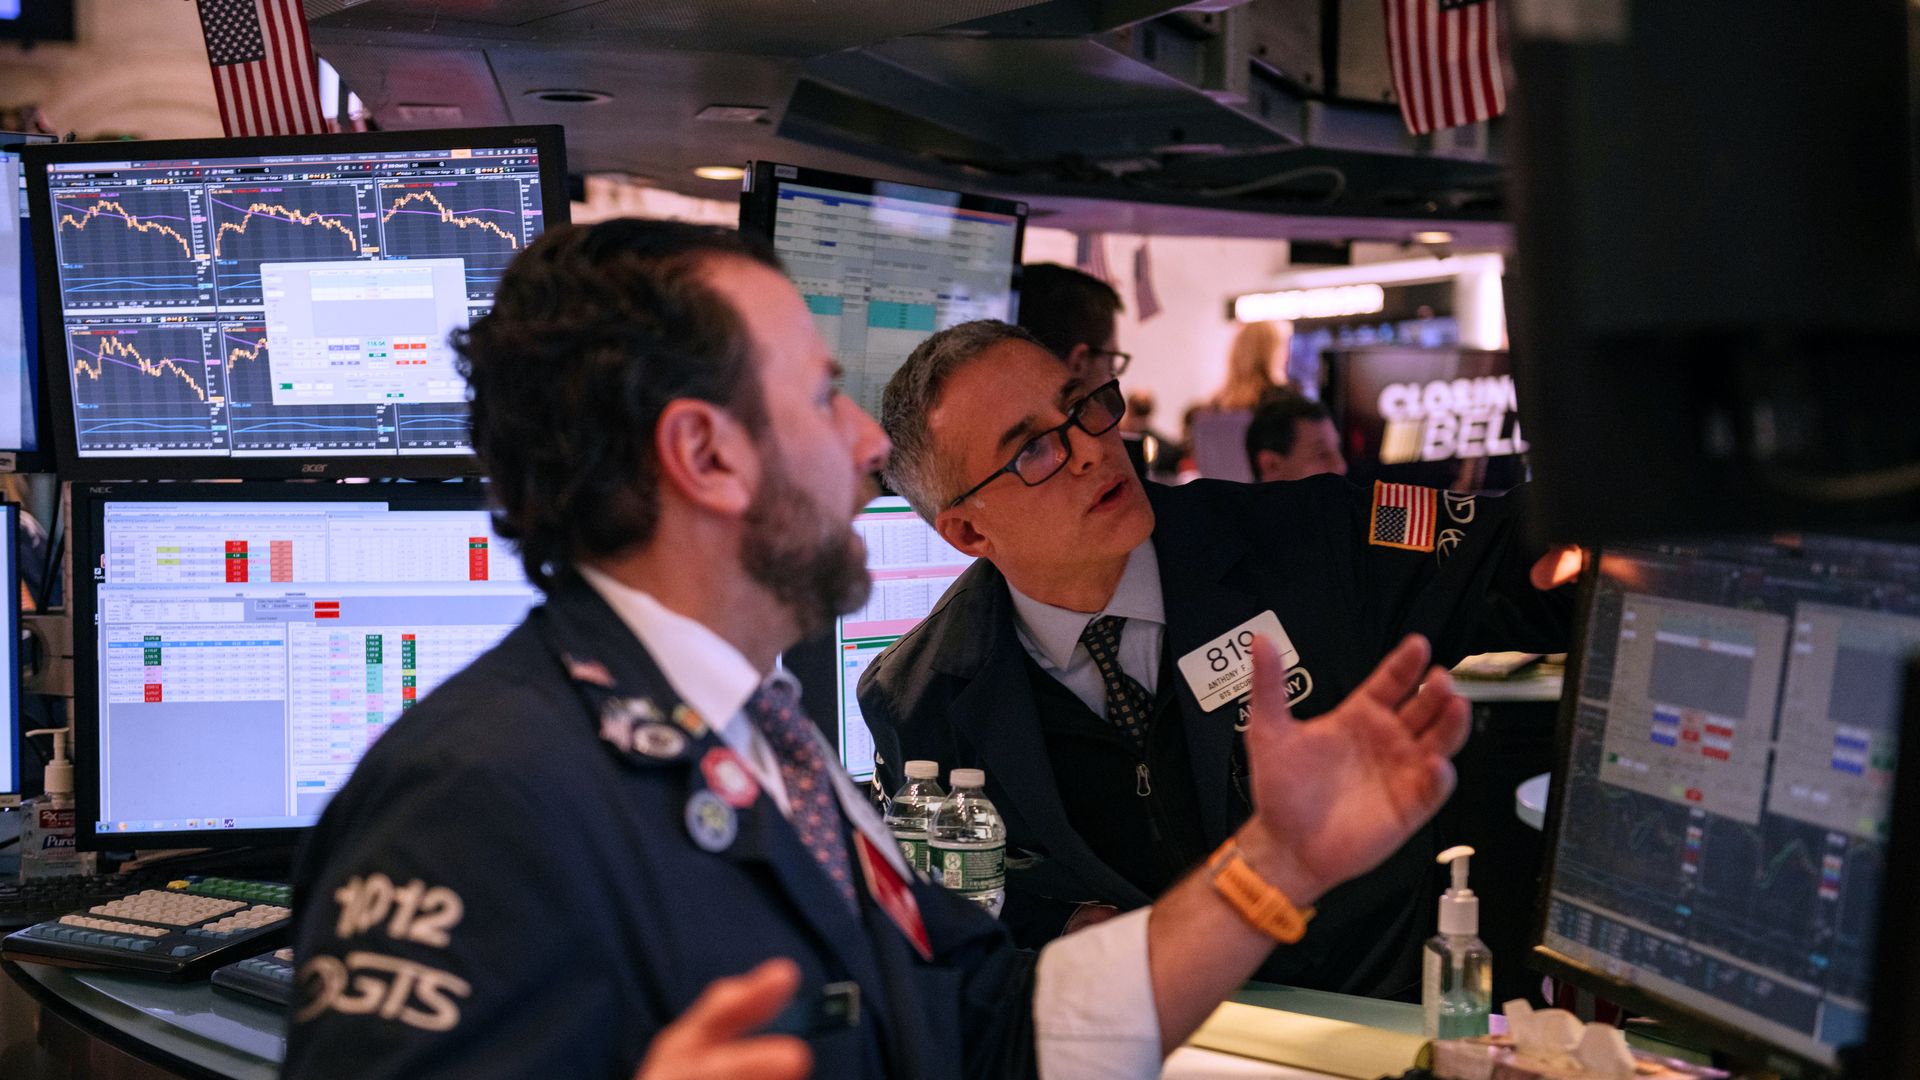 Traders work on the floor of the New York Stock Exchange on February 27, 2020 in New York City